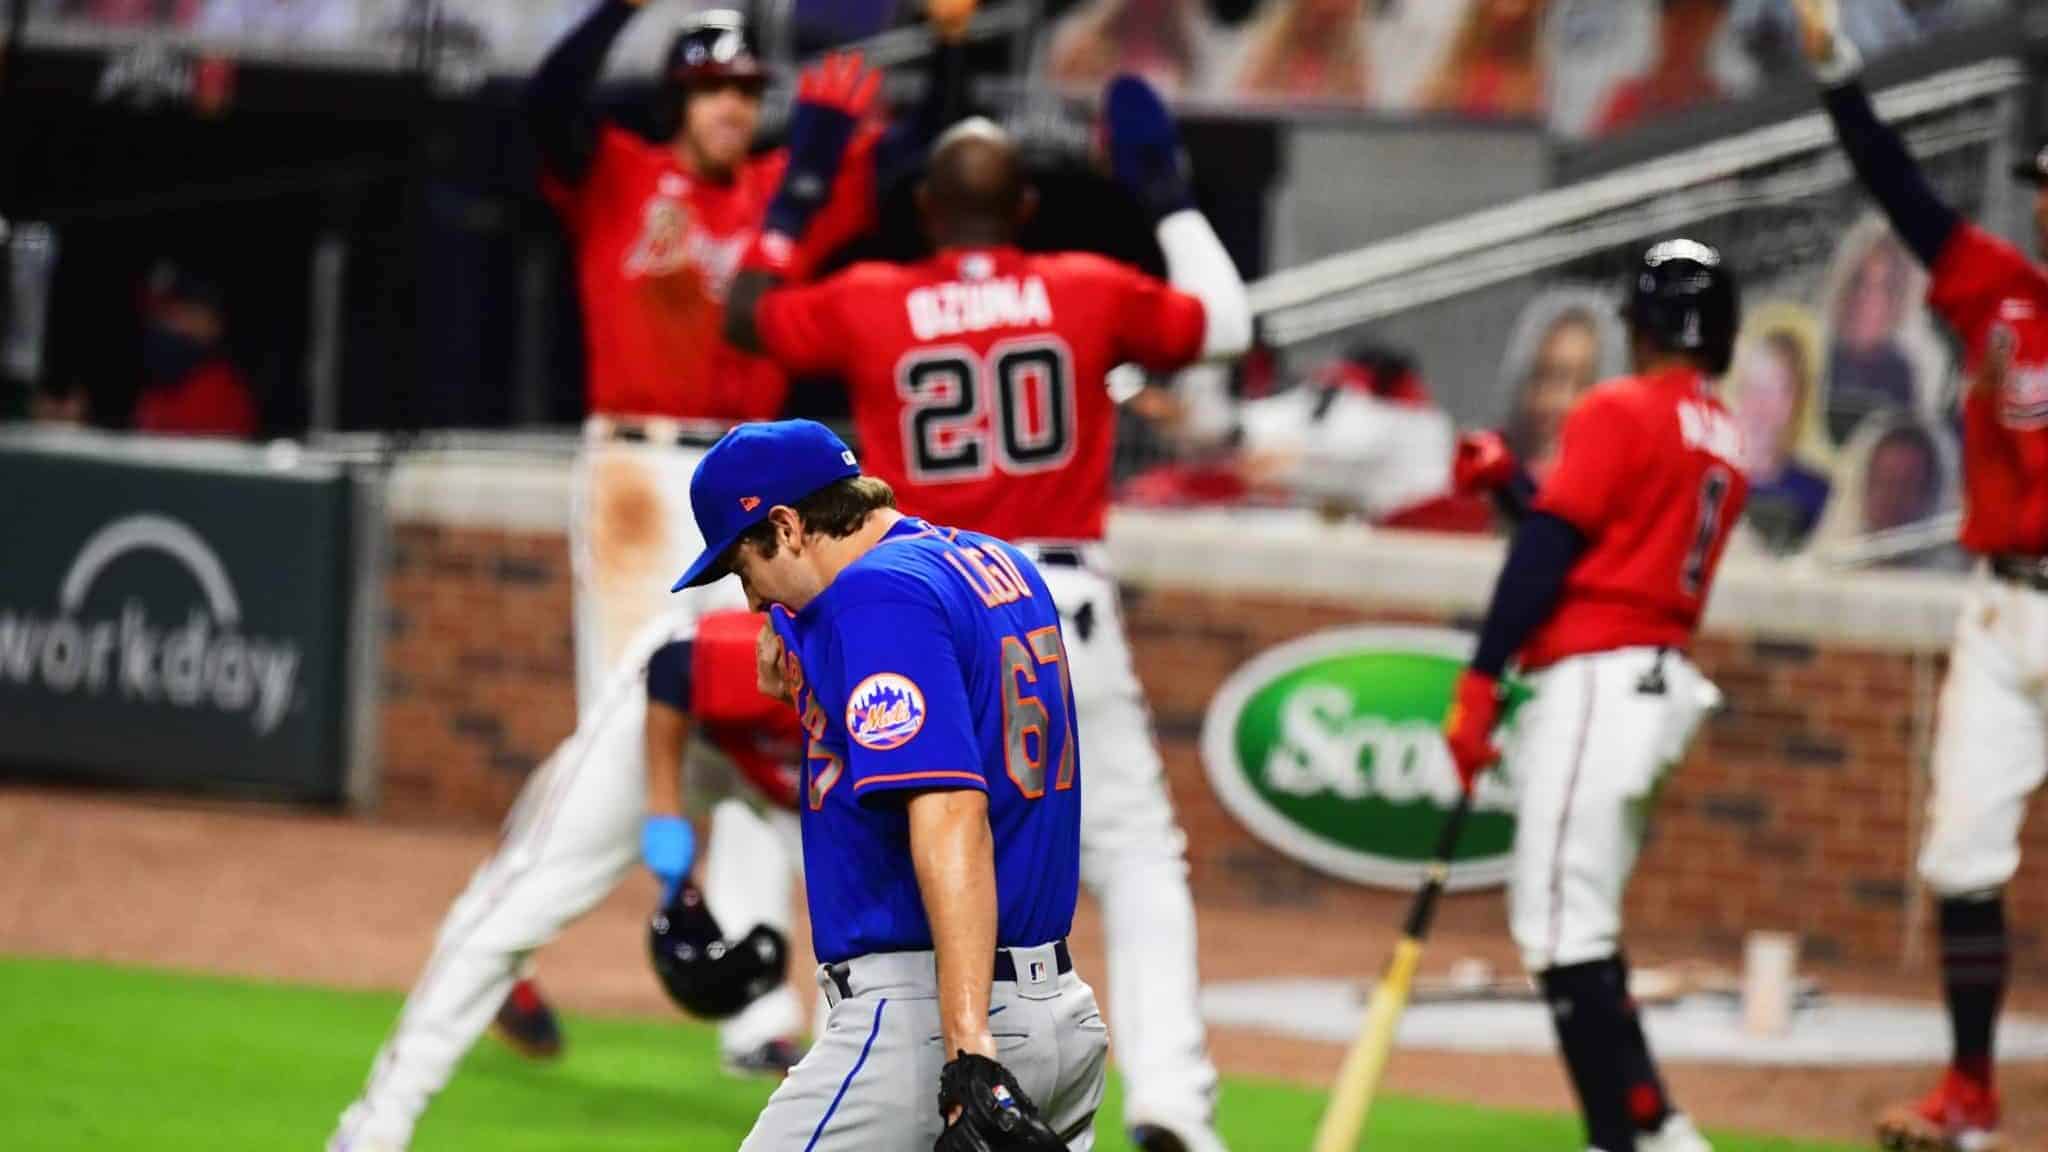 ATLANTA, GA - JULY 31: Seth Lugo #67 of the New York Mets heads back to the mound while members of the Atlanta Braves celebrate an eighth inning rally at SunTrust Field on June 31, 2020 in Atlanta, Georgia.